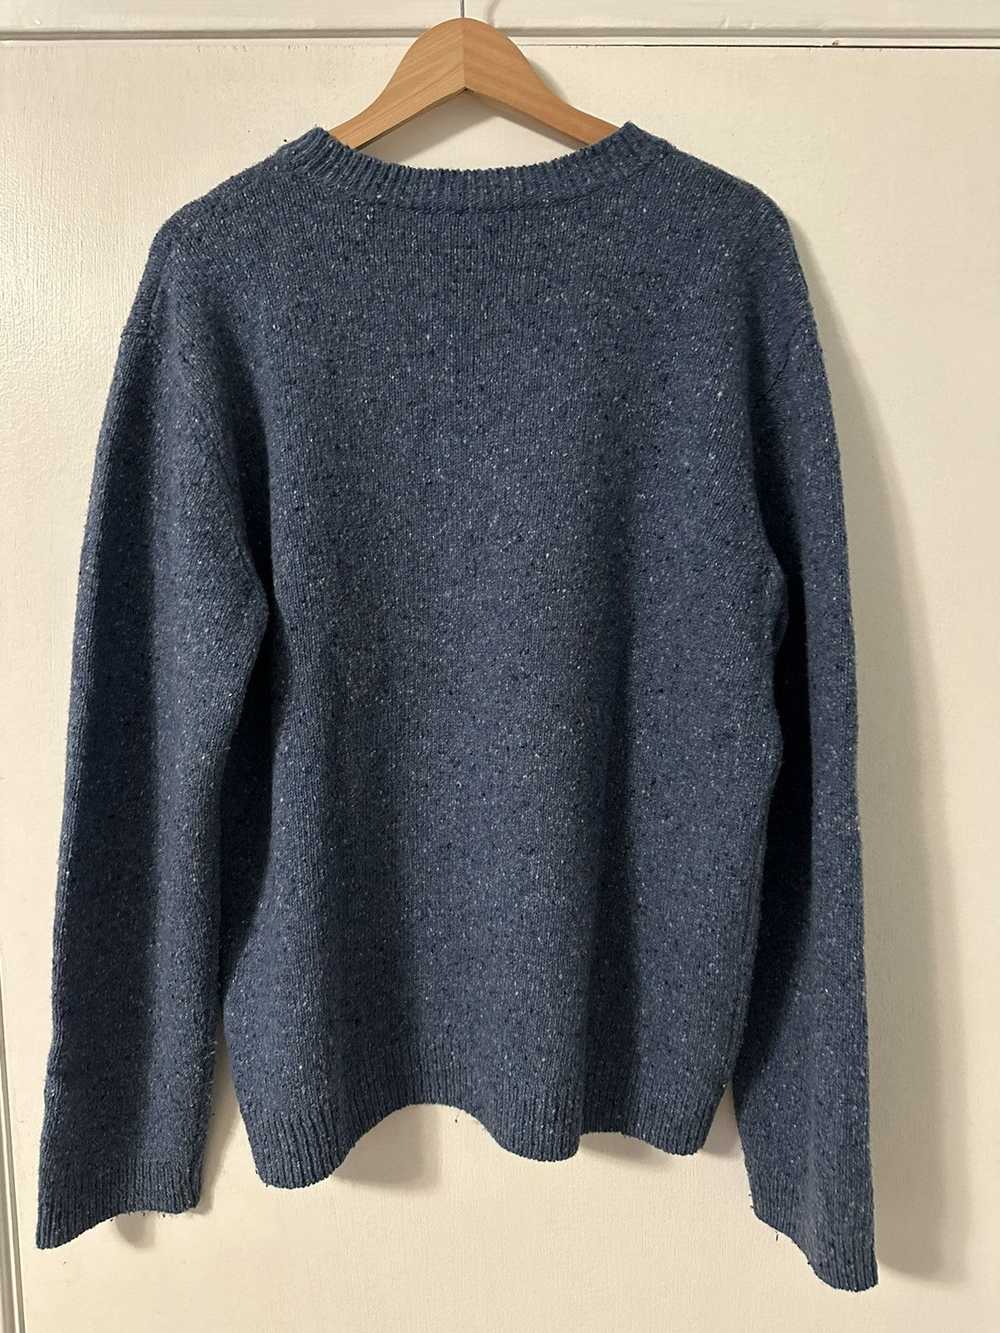 A.P.C. Chandler Sweater - image 4